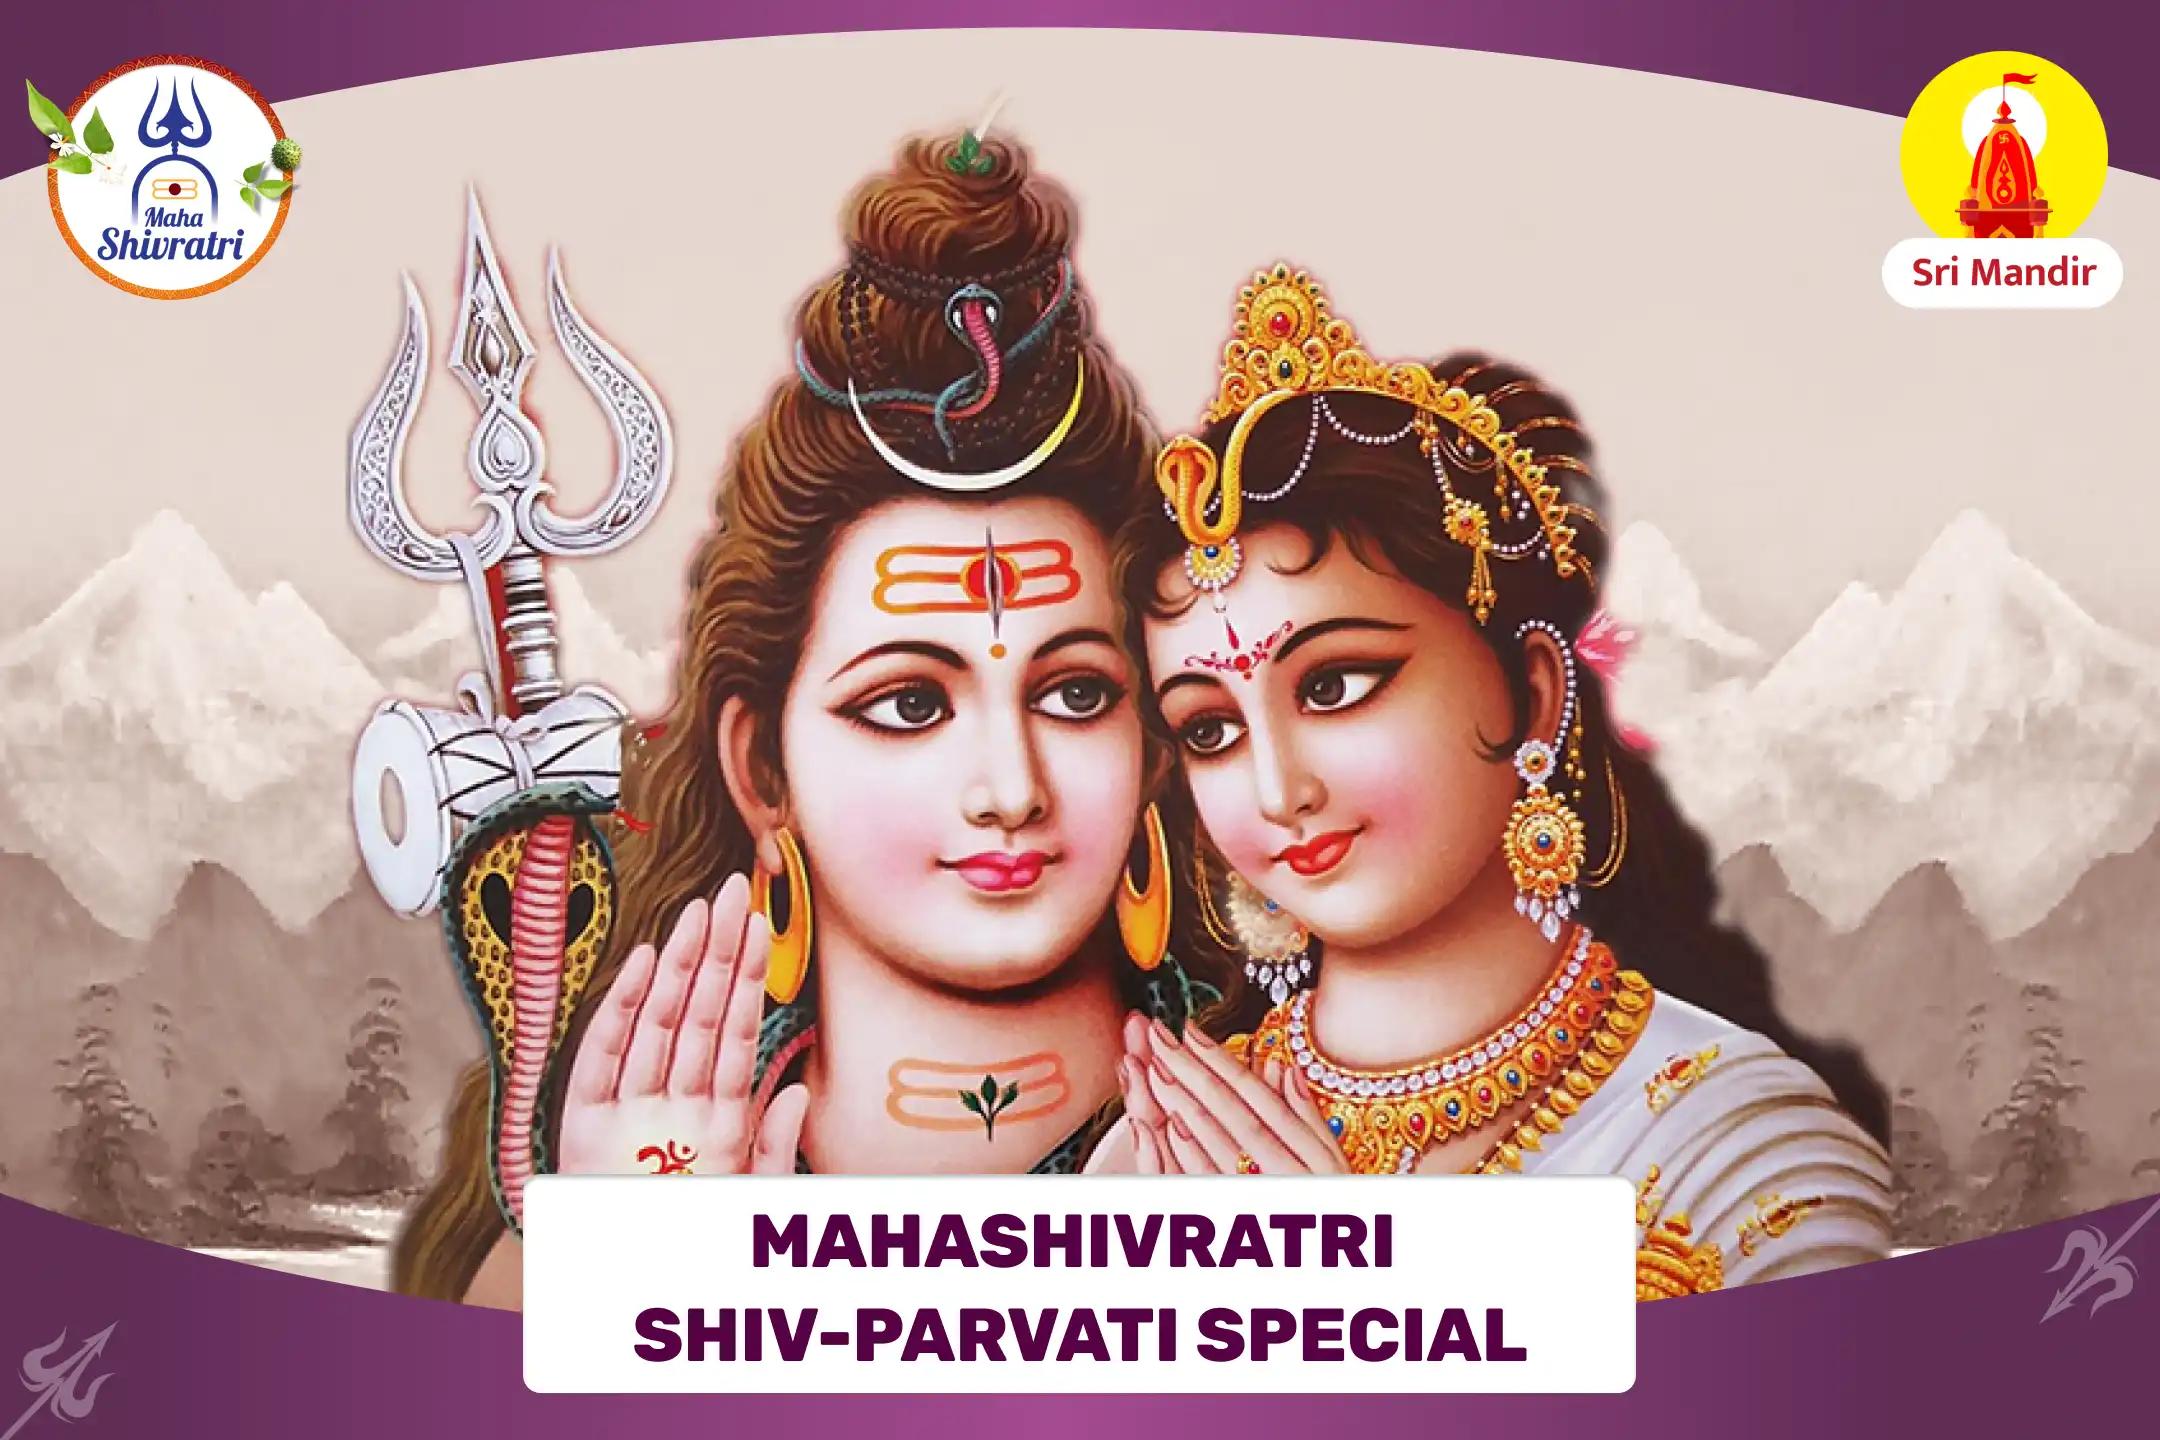 Mahashivratri Special Shiva-Parvati Vivah Puja To Resolve Conflicts and Achieve Bliss in Relationship